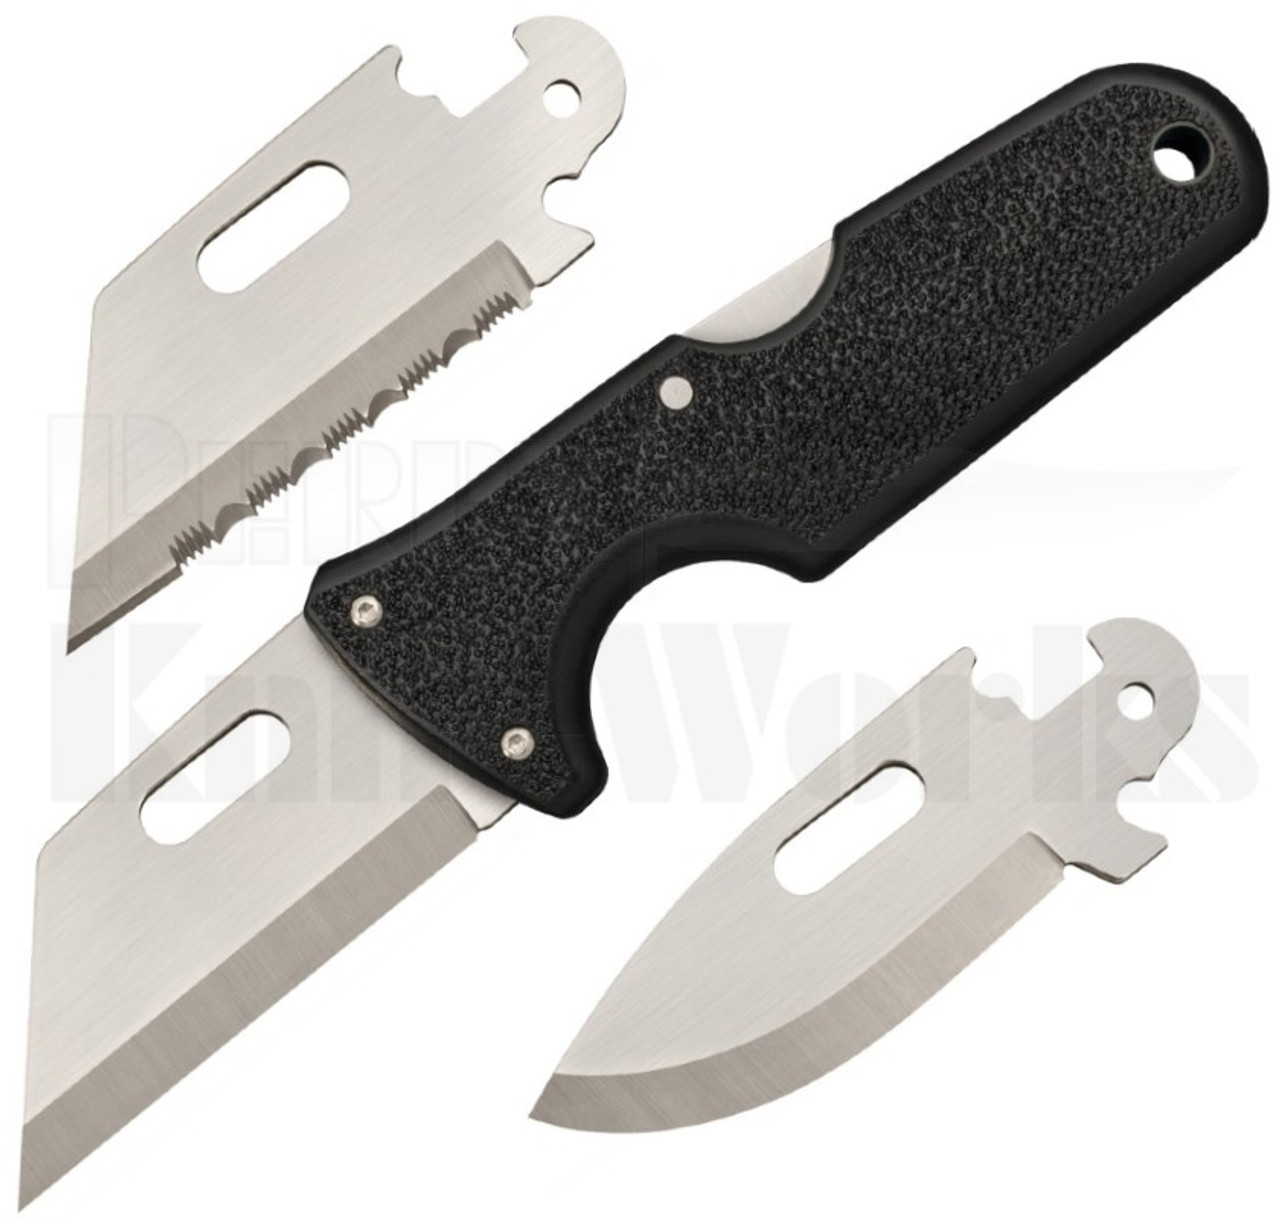 https://cdn11.bigcommerce.com/s-ar8byh/images/stencil/1280x1280/products/10071/34216/Cold-Steel-Click-N-Cut-Exchangeable-Blade-Knife-Black-40A__41401.1586546326.jpg?c=2